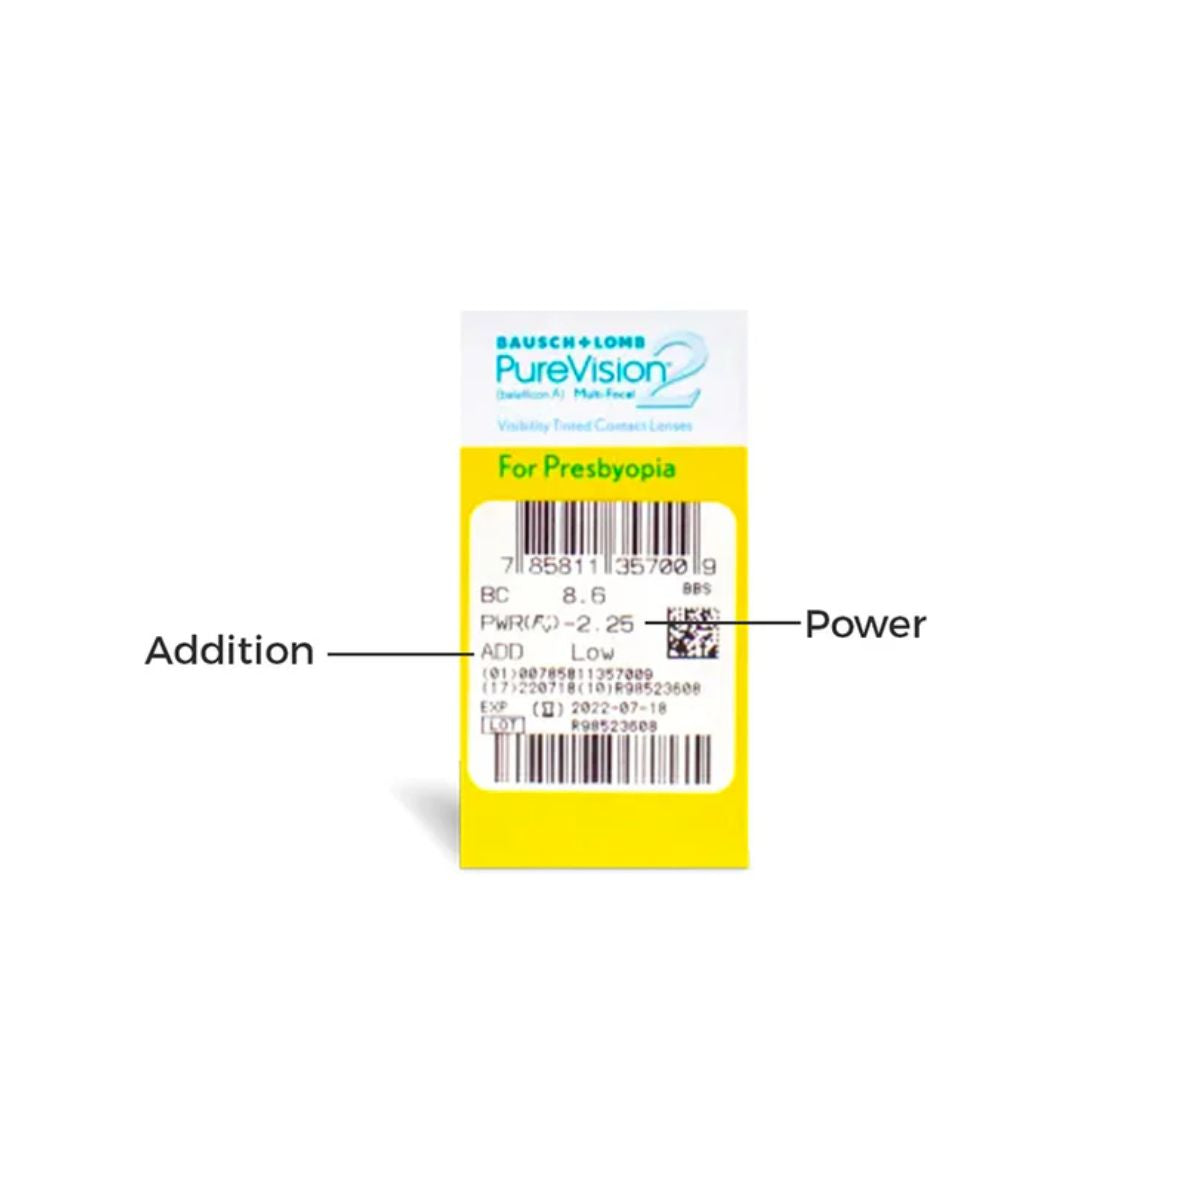 " Buy PureVision 2 Monthly Disposable For Presbyopia Contact Lenses  optorium"